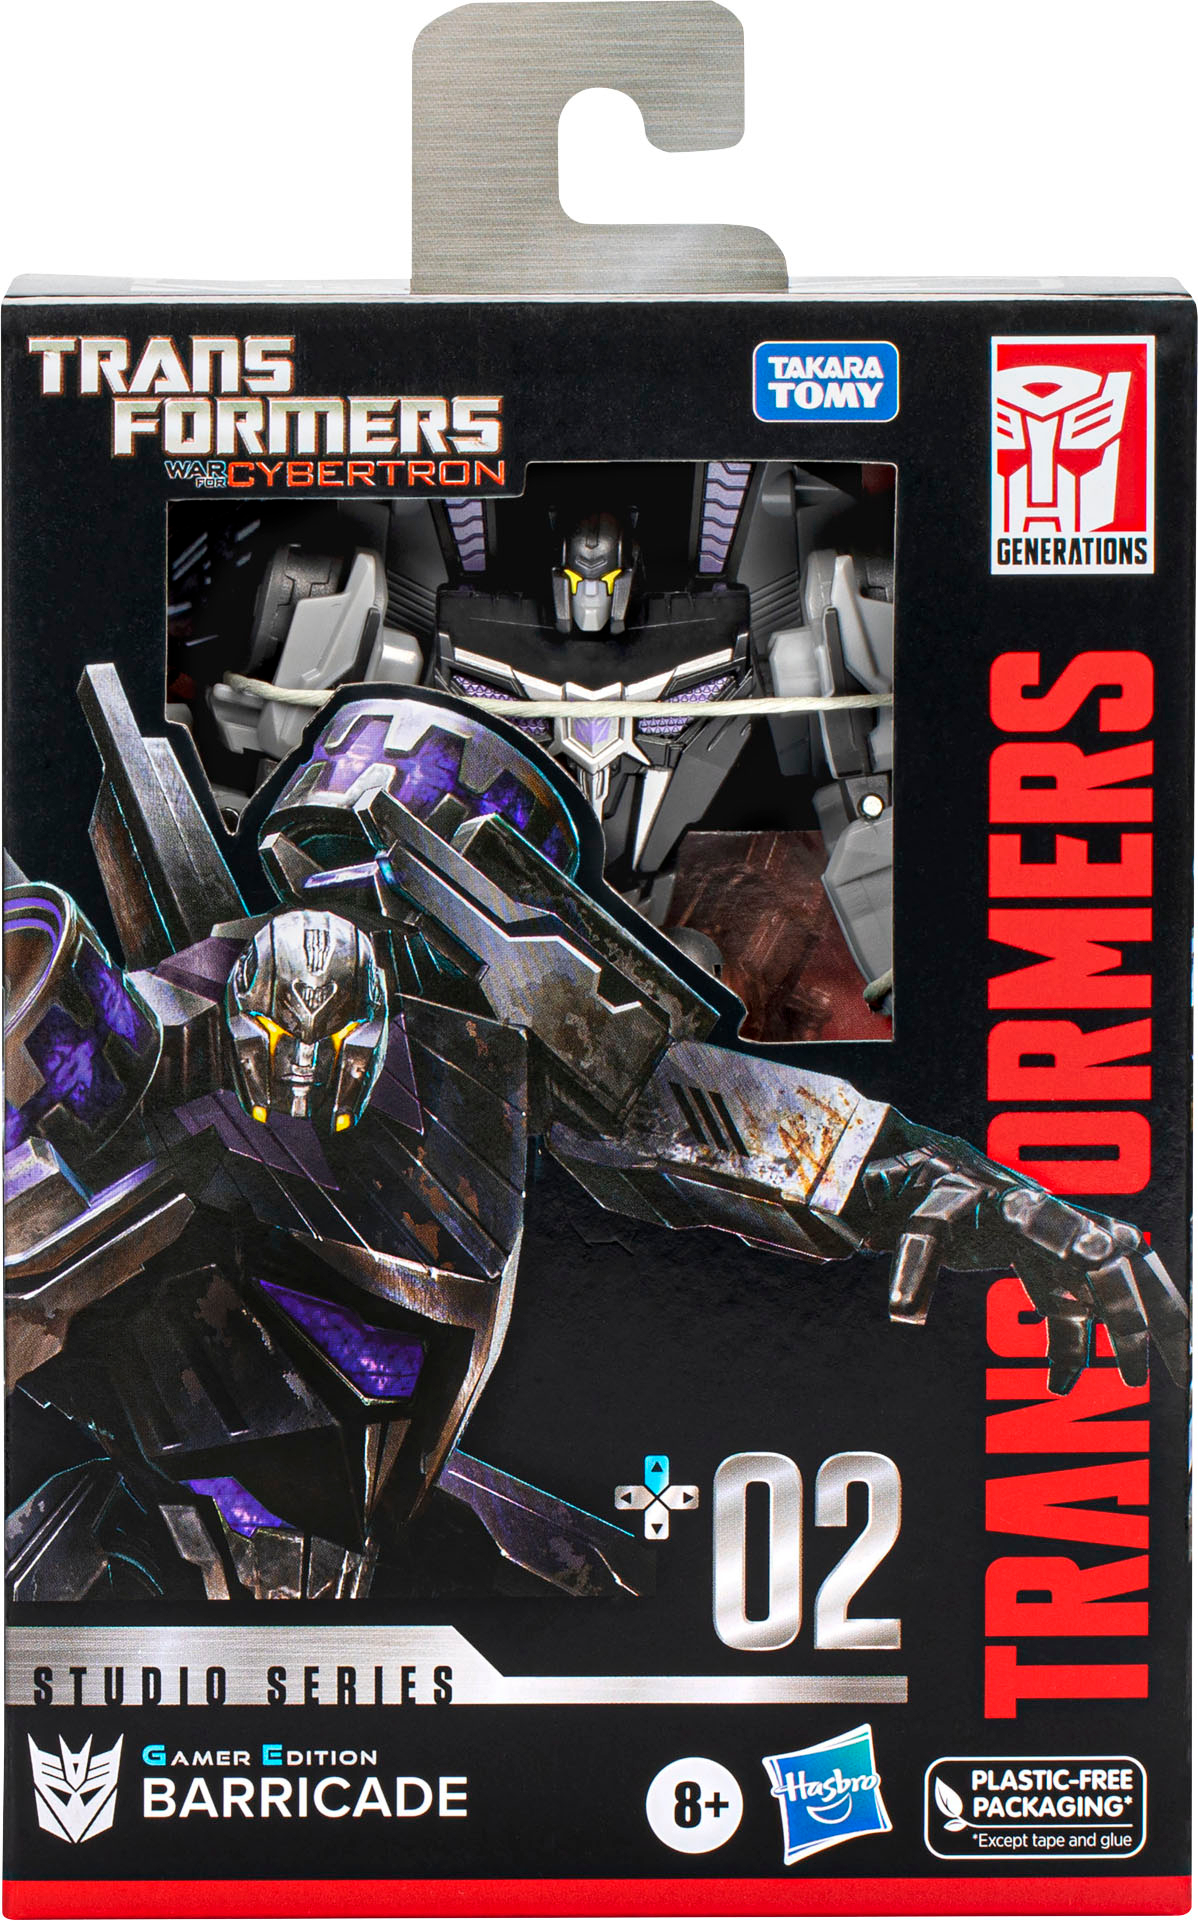 Angle View: Transformers - Studio Series Deluxe 02 Transformers: War for Cybertron Gamer Edition Barricade - multi